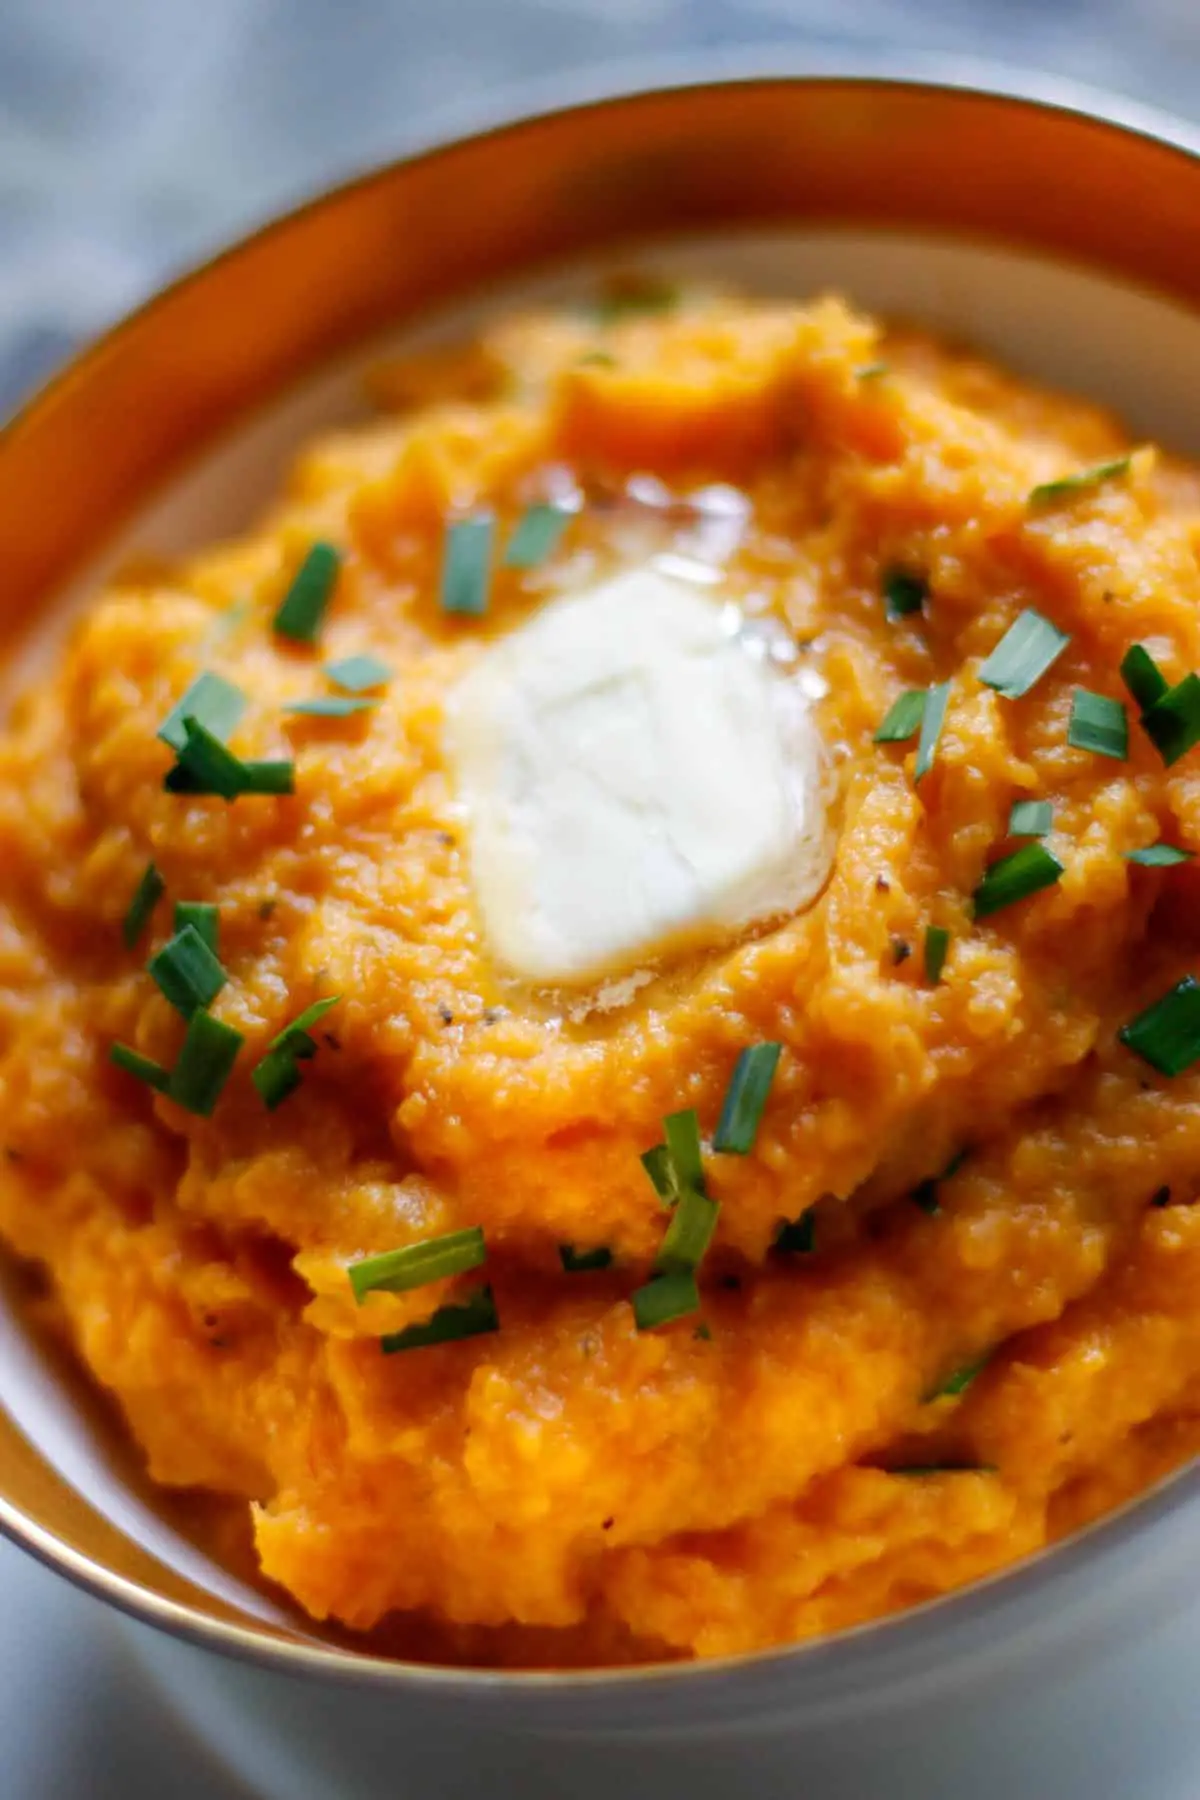 Sweet mashed potatoes in a gold rimmed bowl garnished with chopped chives with melting butter on the top.